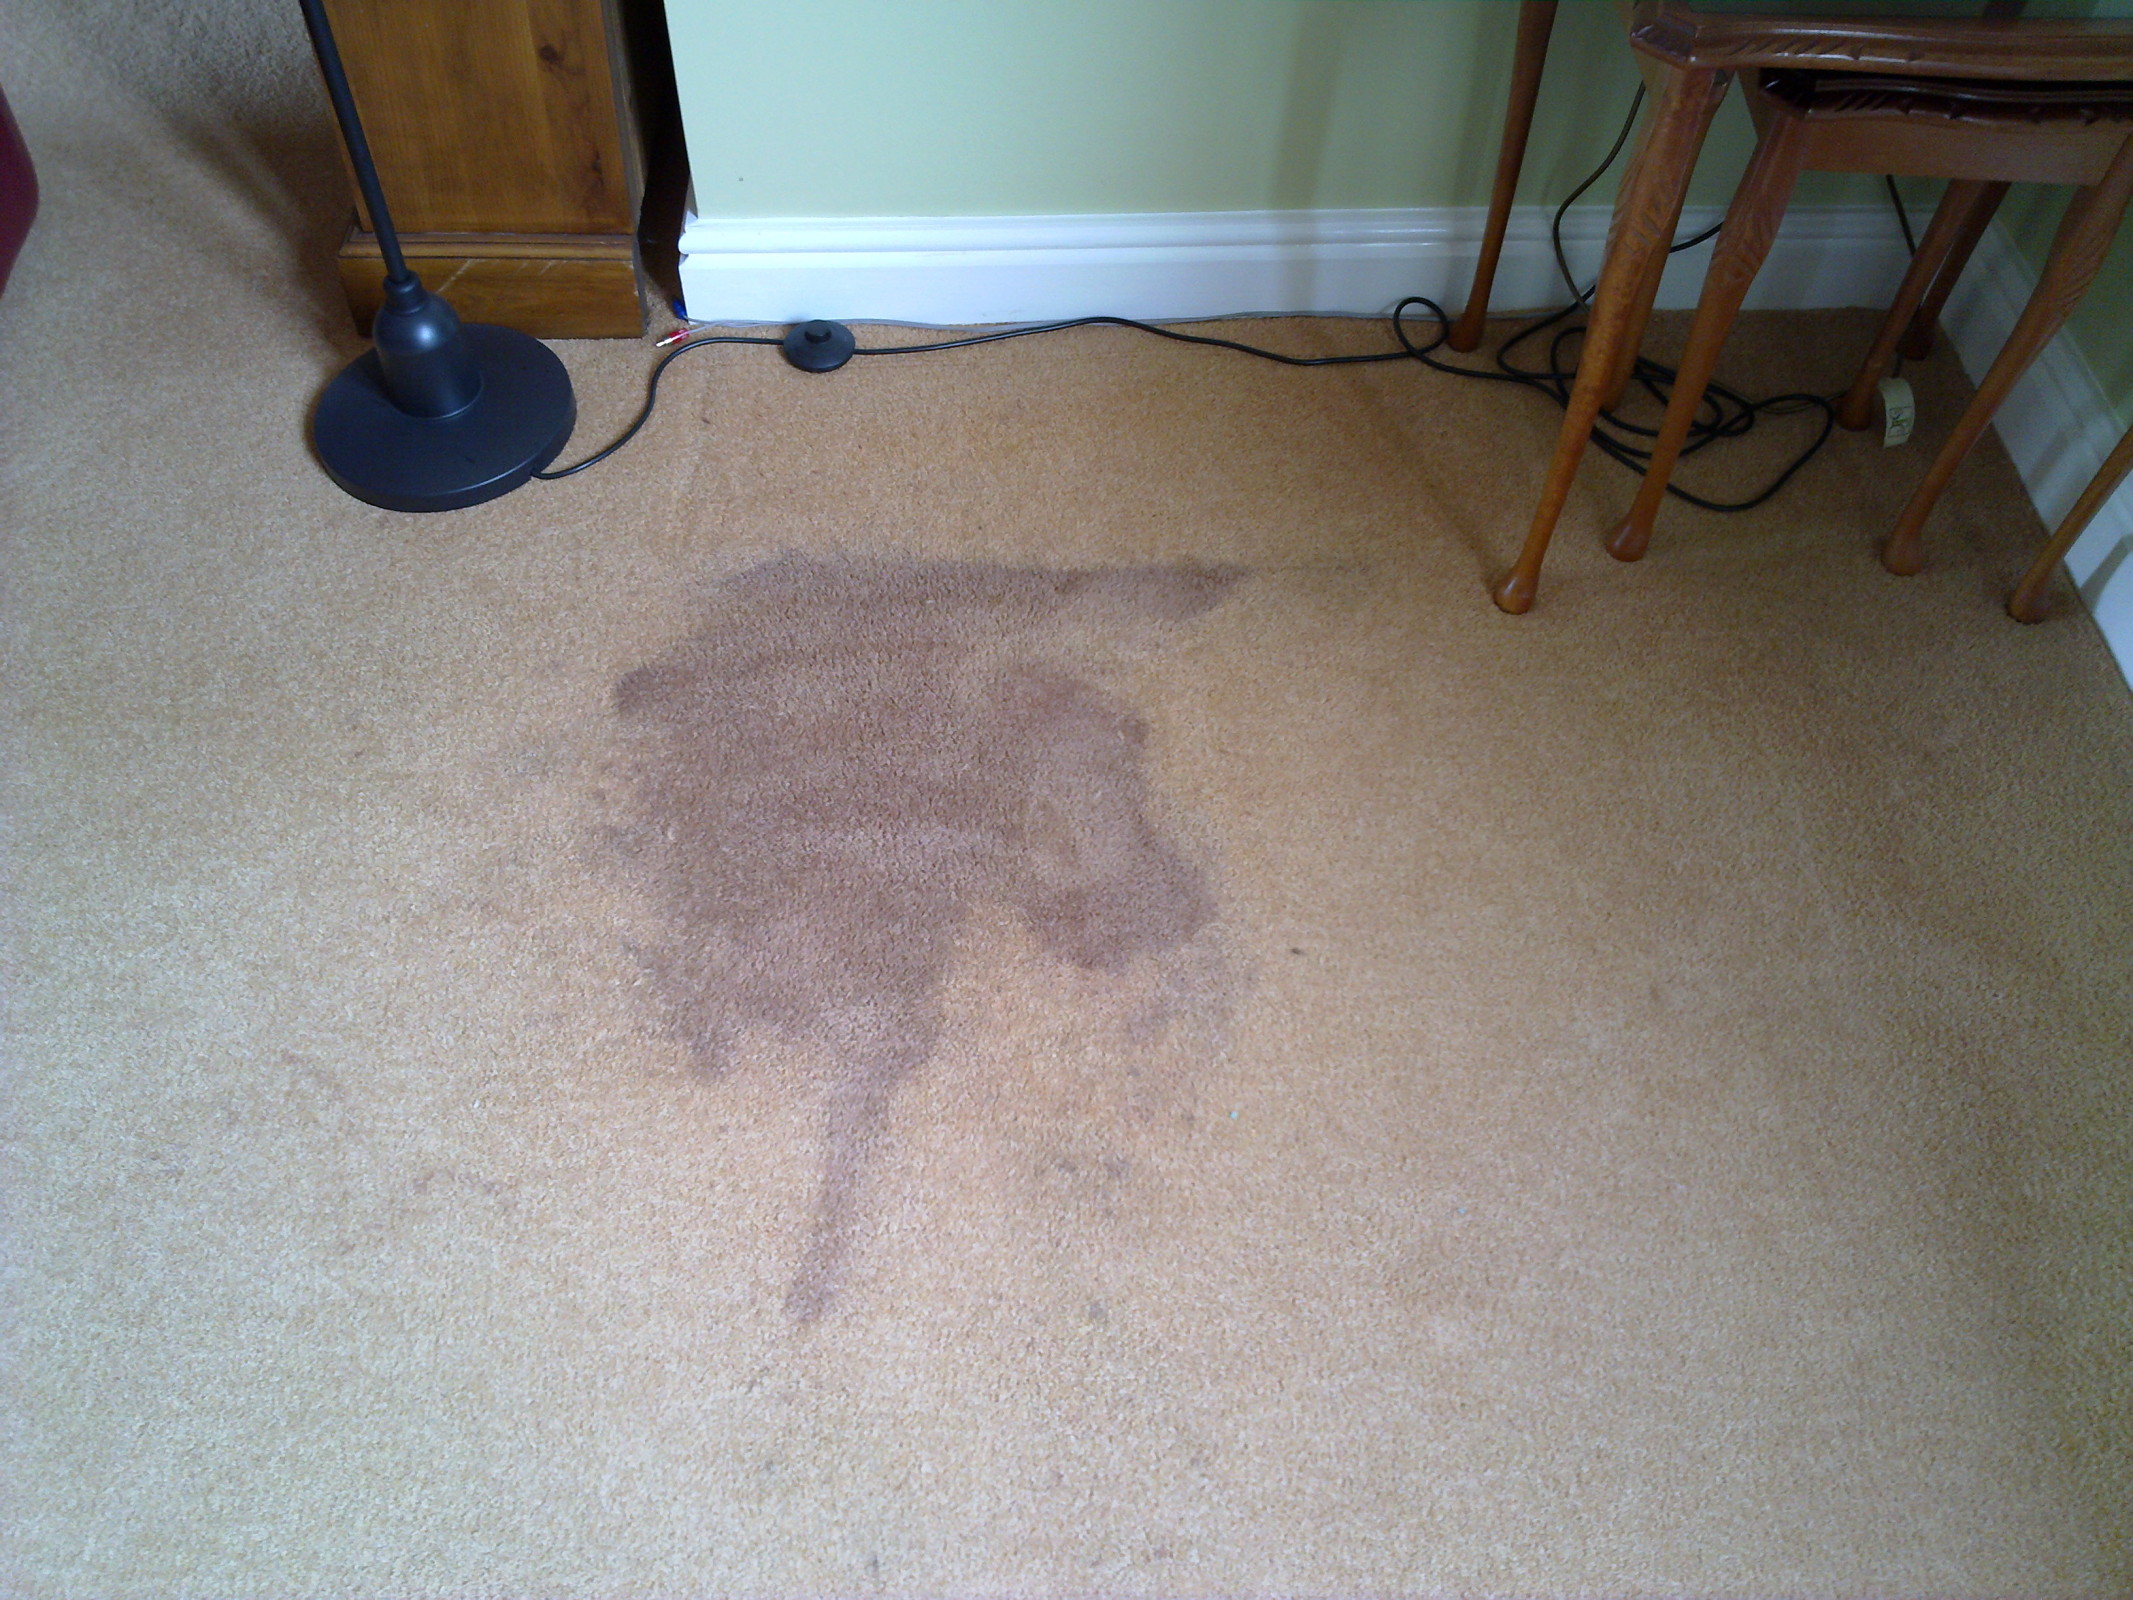 WHY DO CARPET STAINS COME BACK?